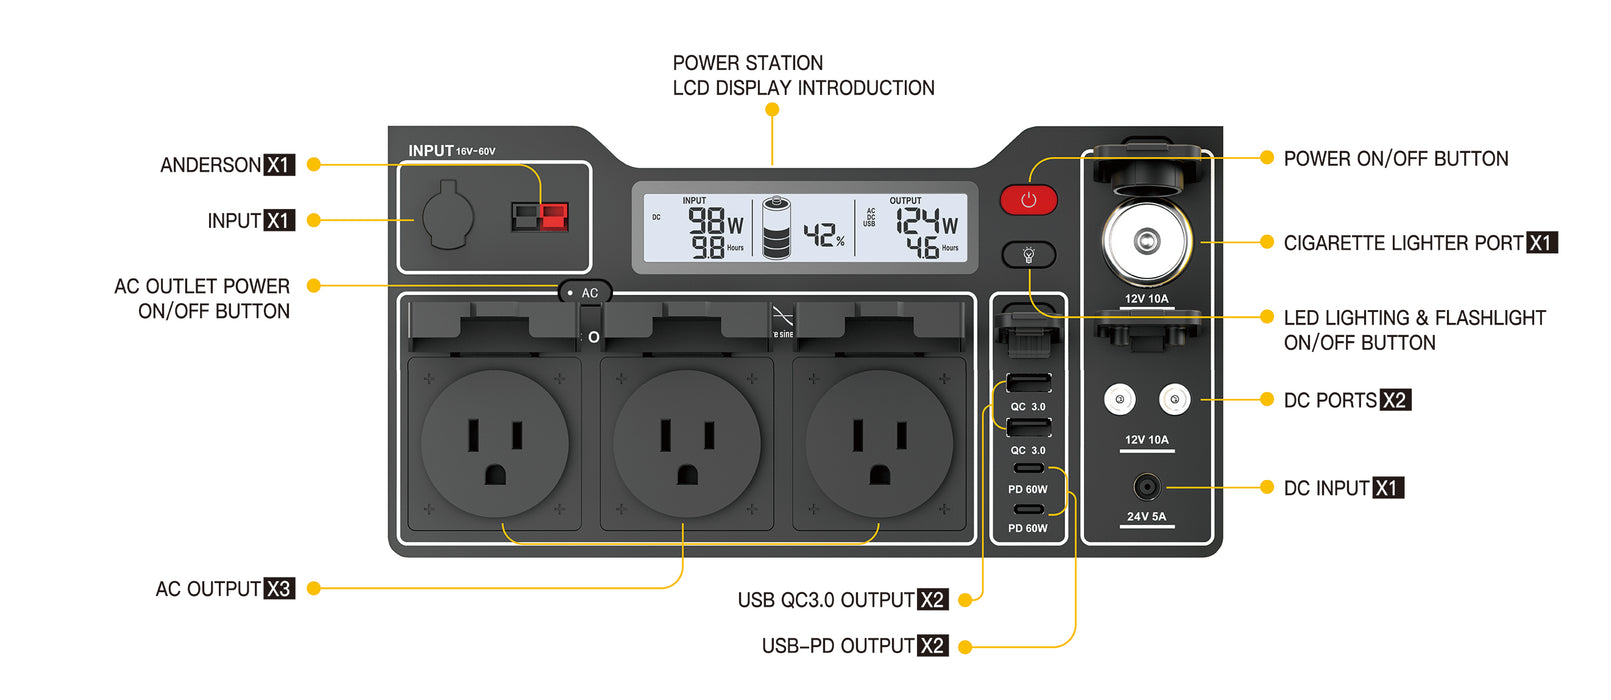 Togopower Advance1550,1512Wh Power Station with Yargopower 100W Solar Panel(YP) Included